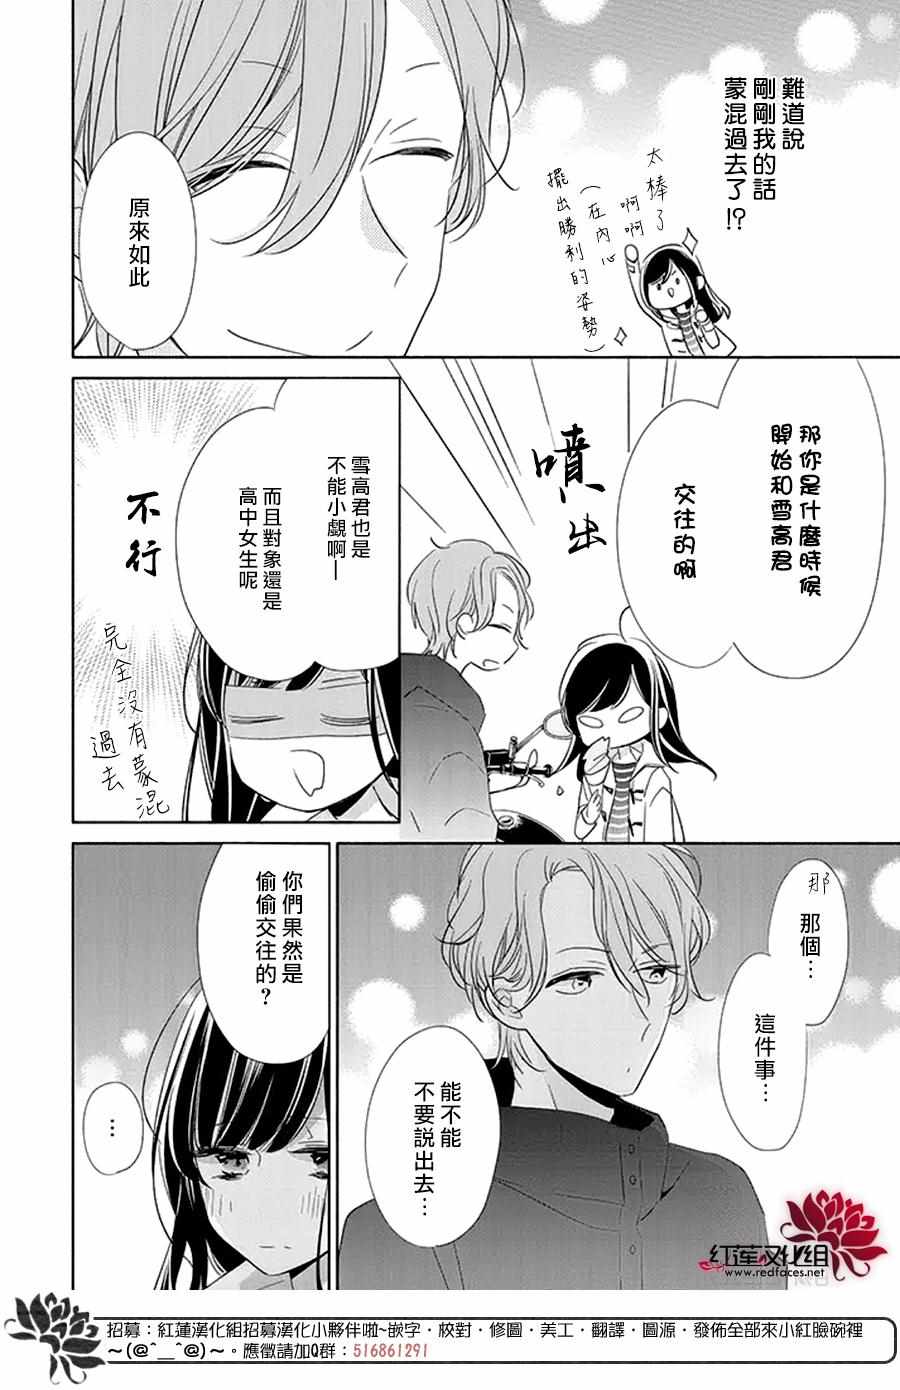 If given a second chance - 22話 - 6